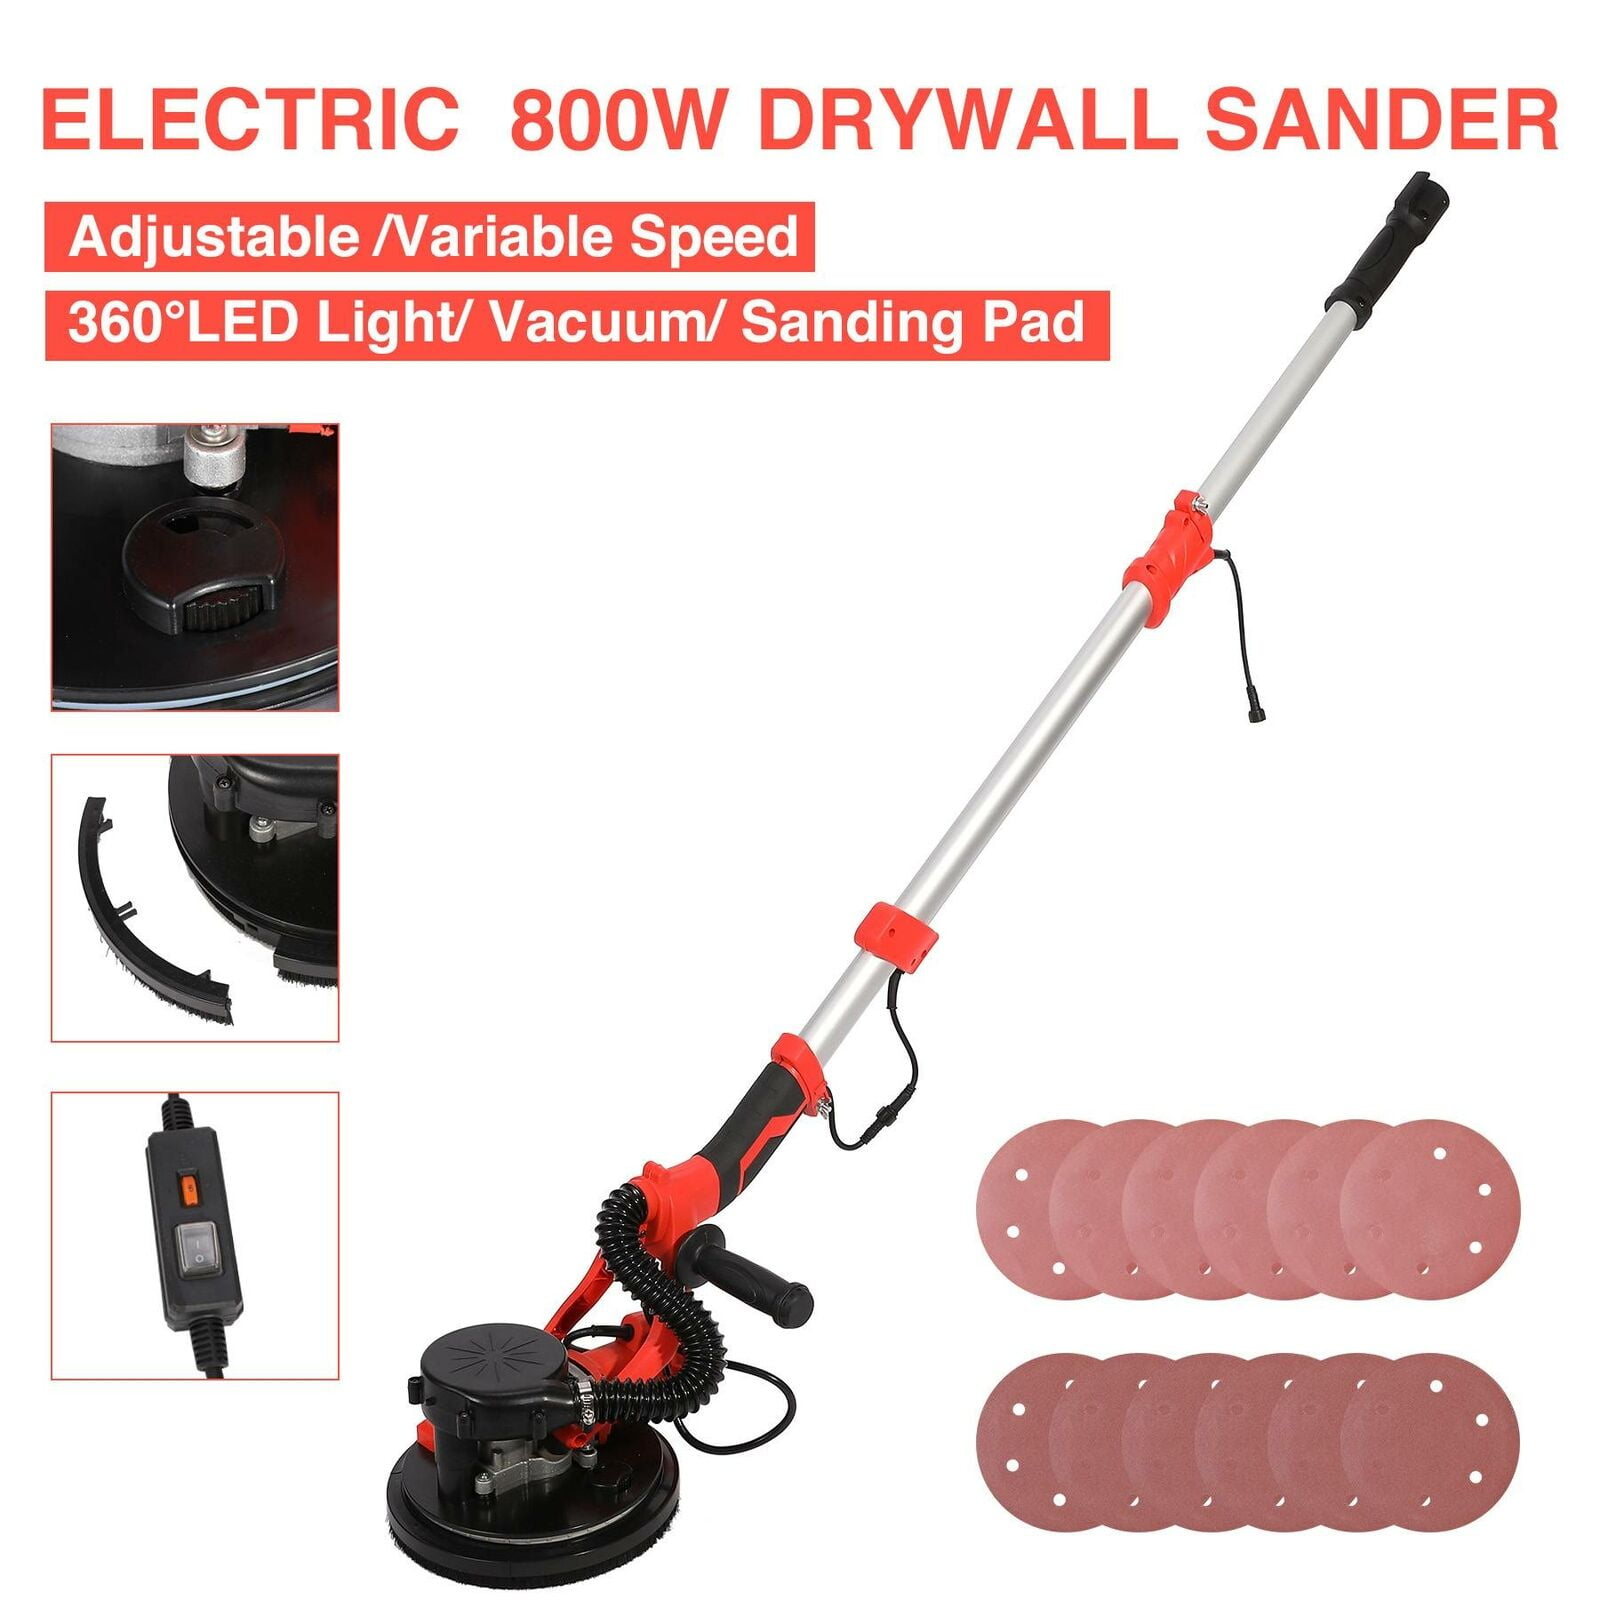 800w Portable Electric Drywall Sander Vacuum Adjustable Speed Durable for sale online 